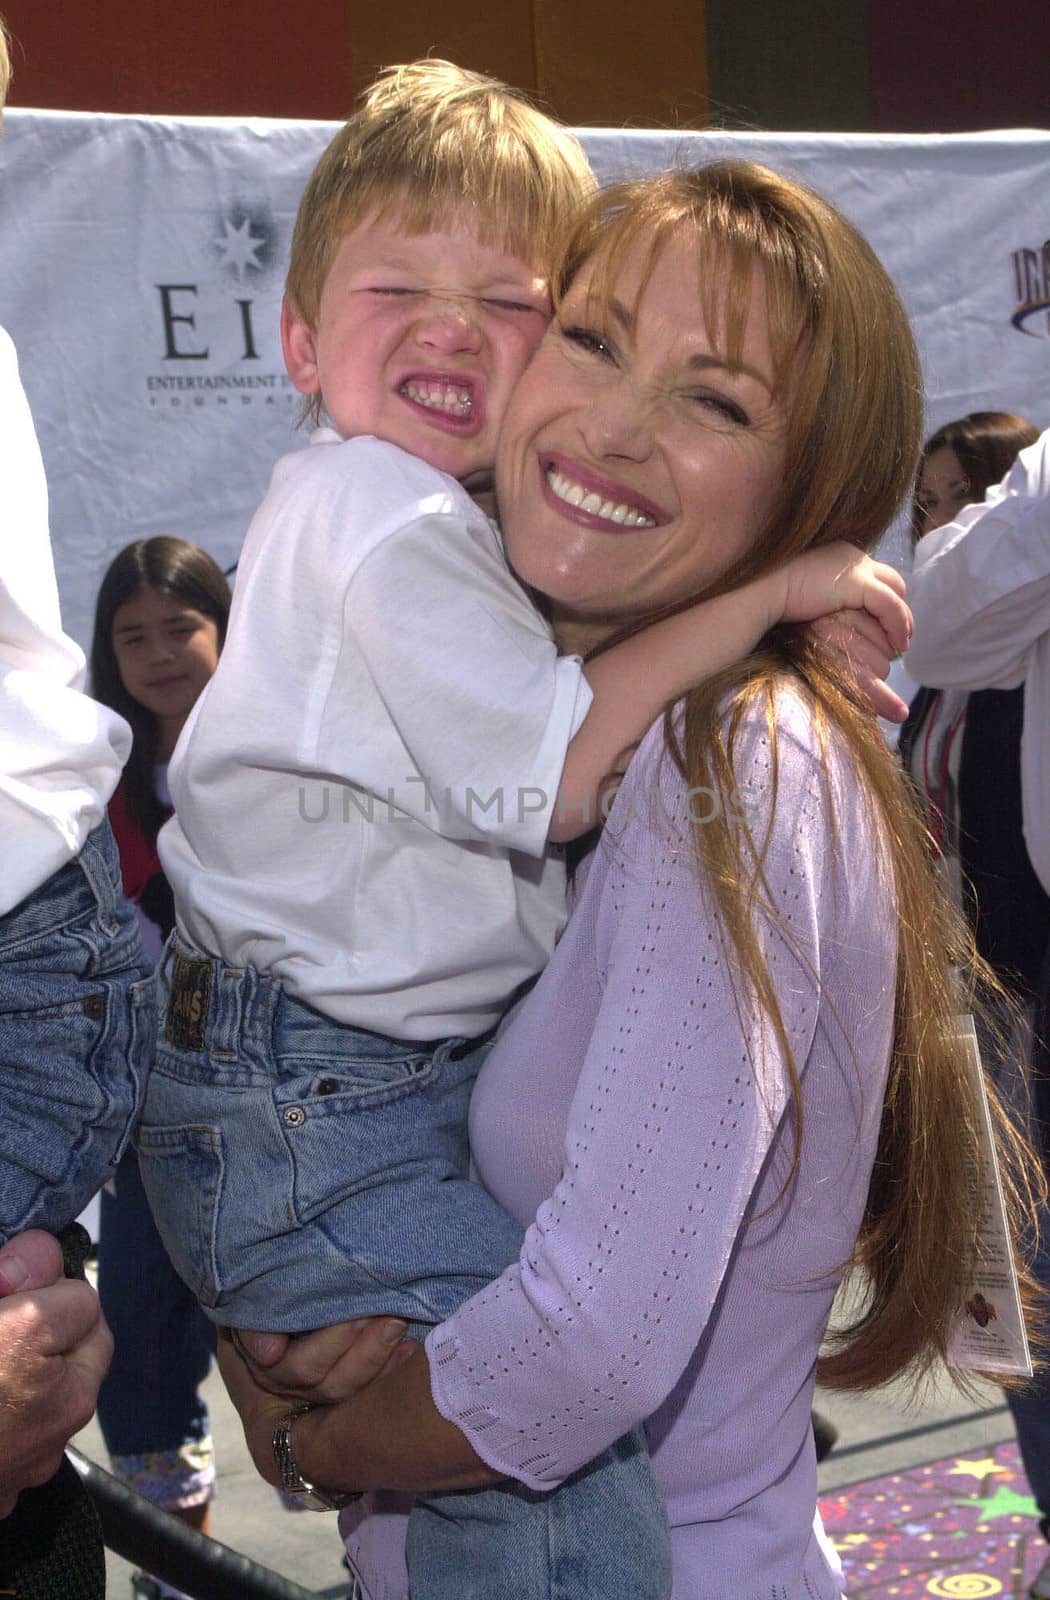 Jane Seymour and Son at the Education Works benefit to promote after-school activities, Universal Studios Hollywood, 03-25-00